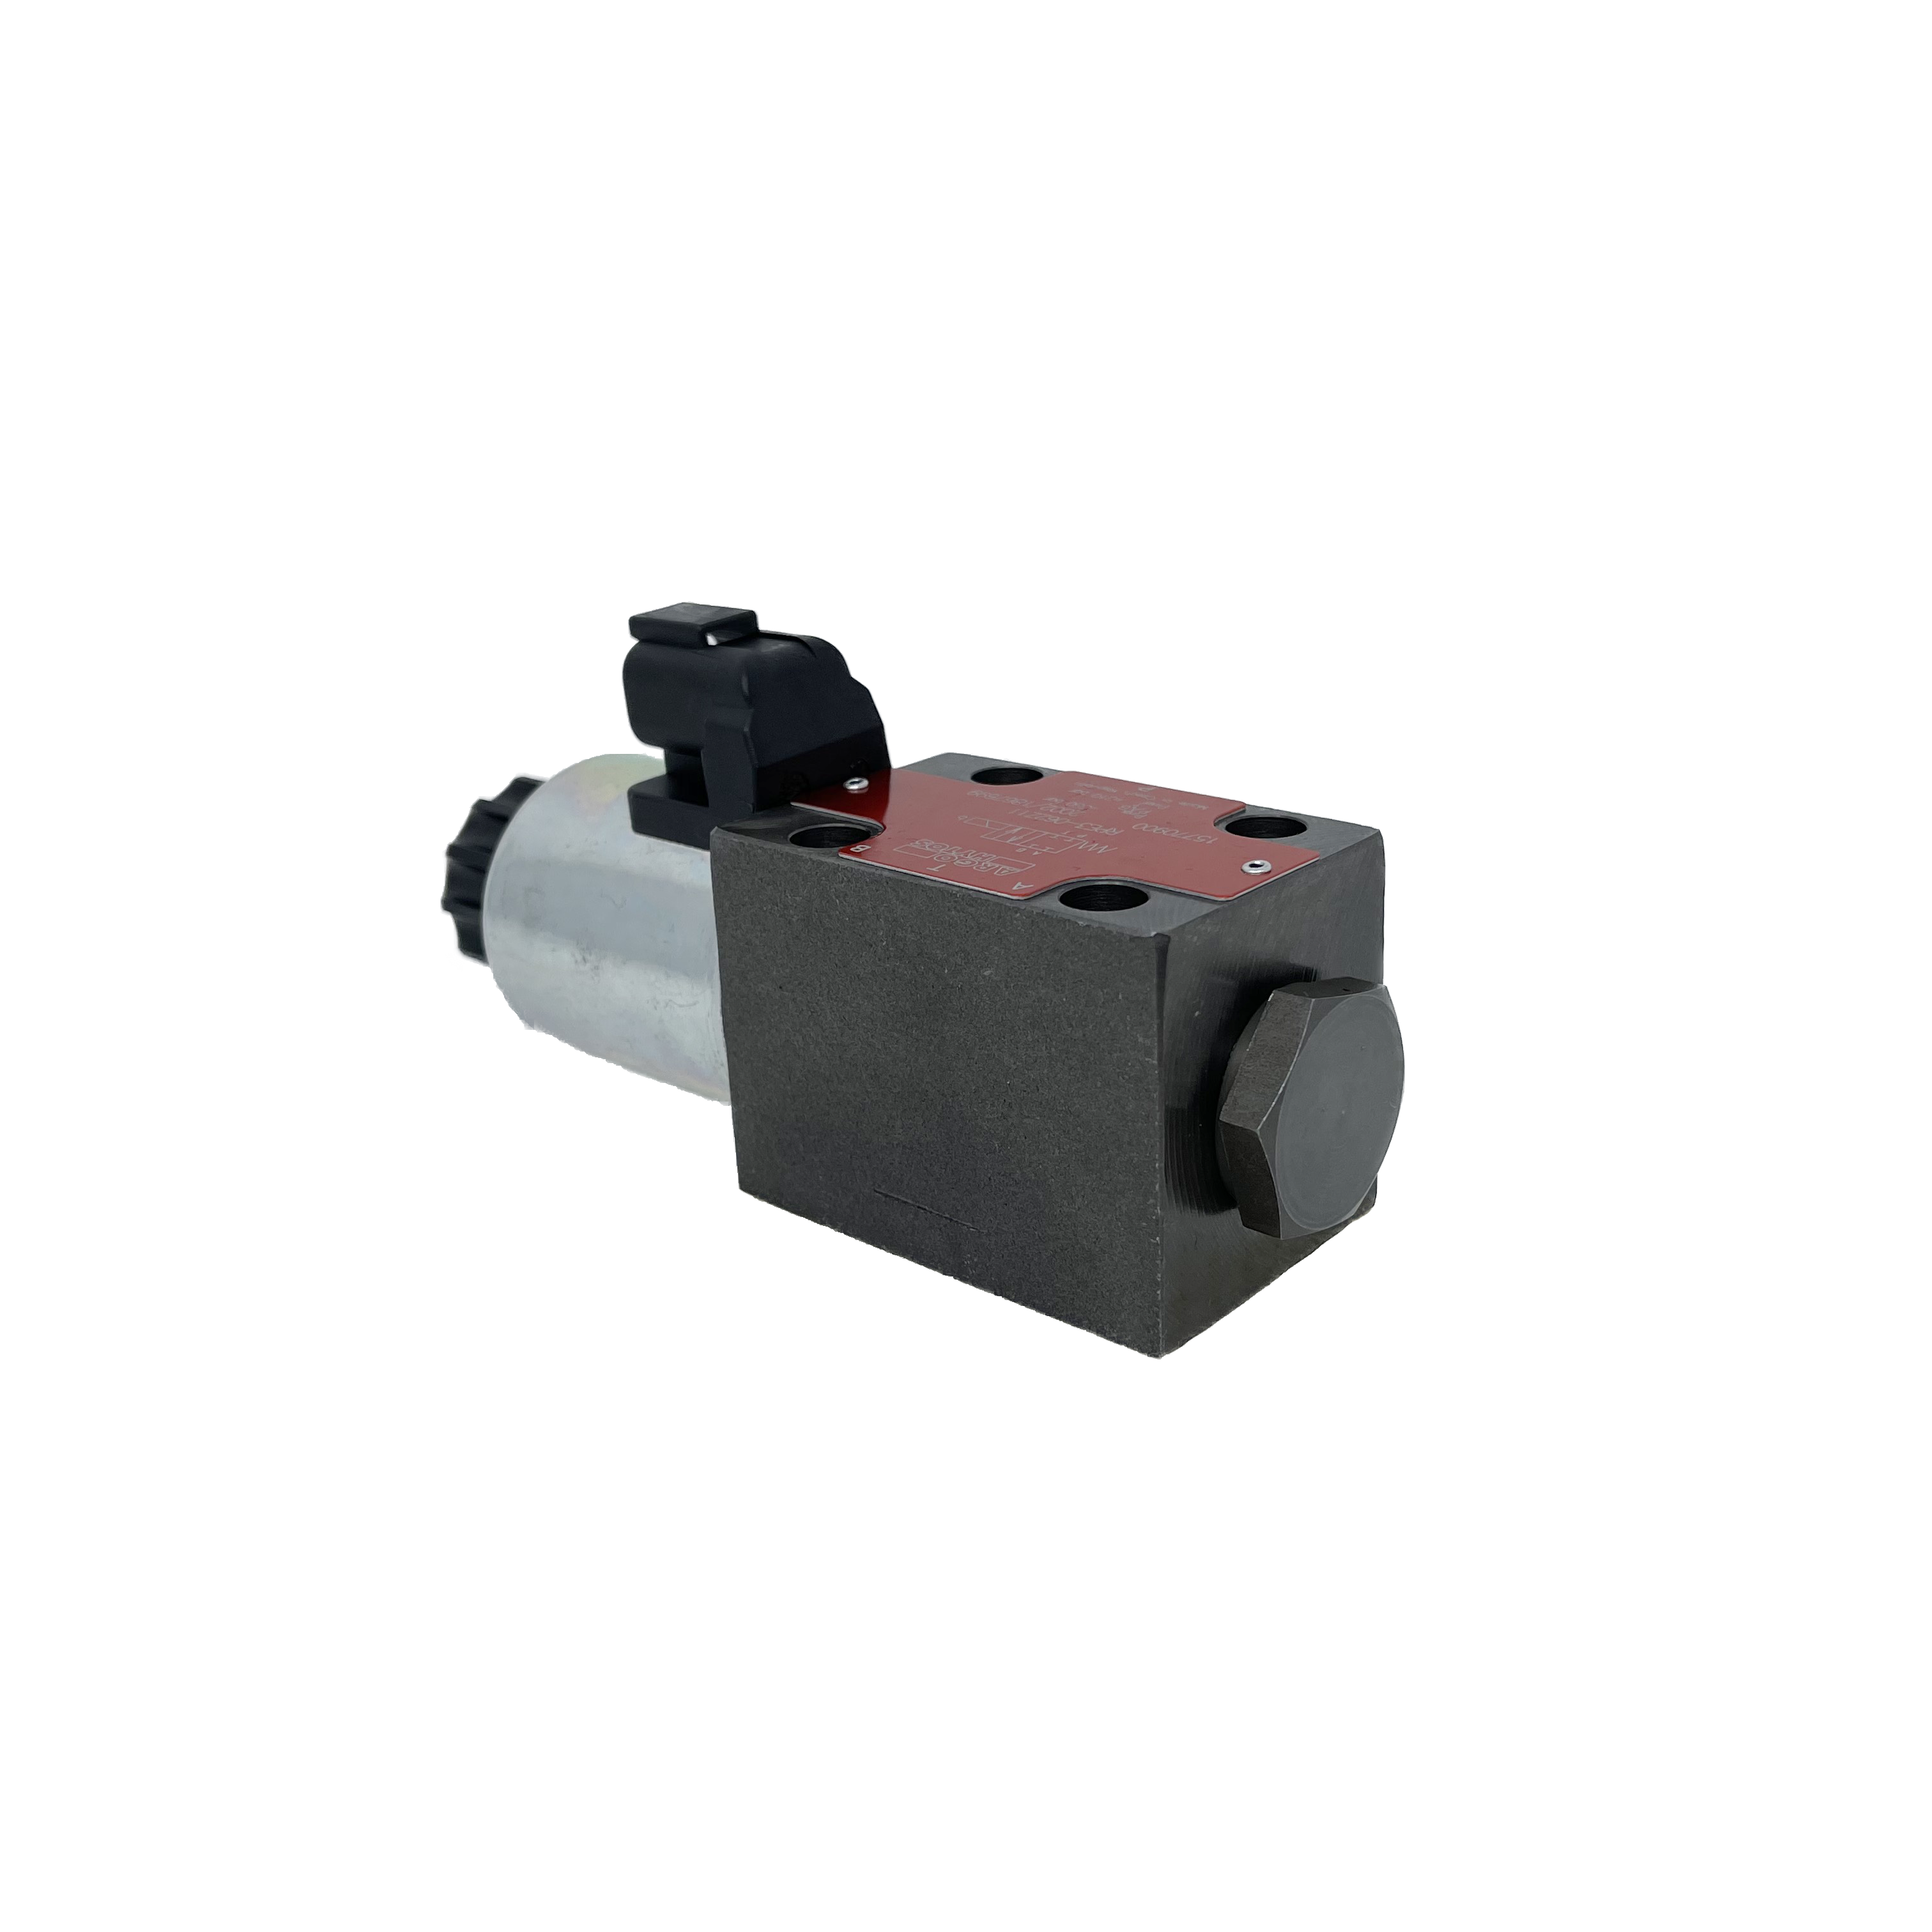 RPE3-062Z11/01200E12A : Argo Hytos Directional Control Valve, D03 (NG6), 21GPM, 5100psi, 2P4W, 12 VDC, Deutsch, Spring Return, All Ports Blocked in Neutral, Coil Side B